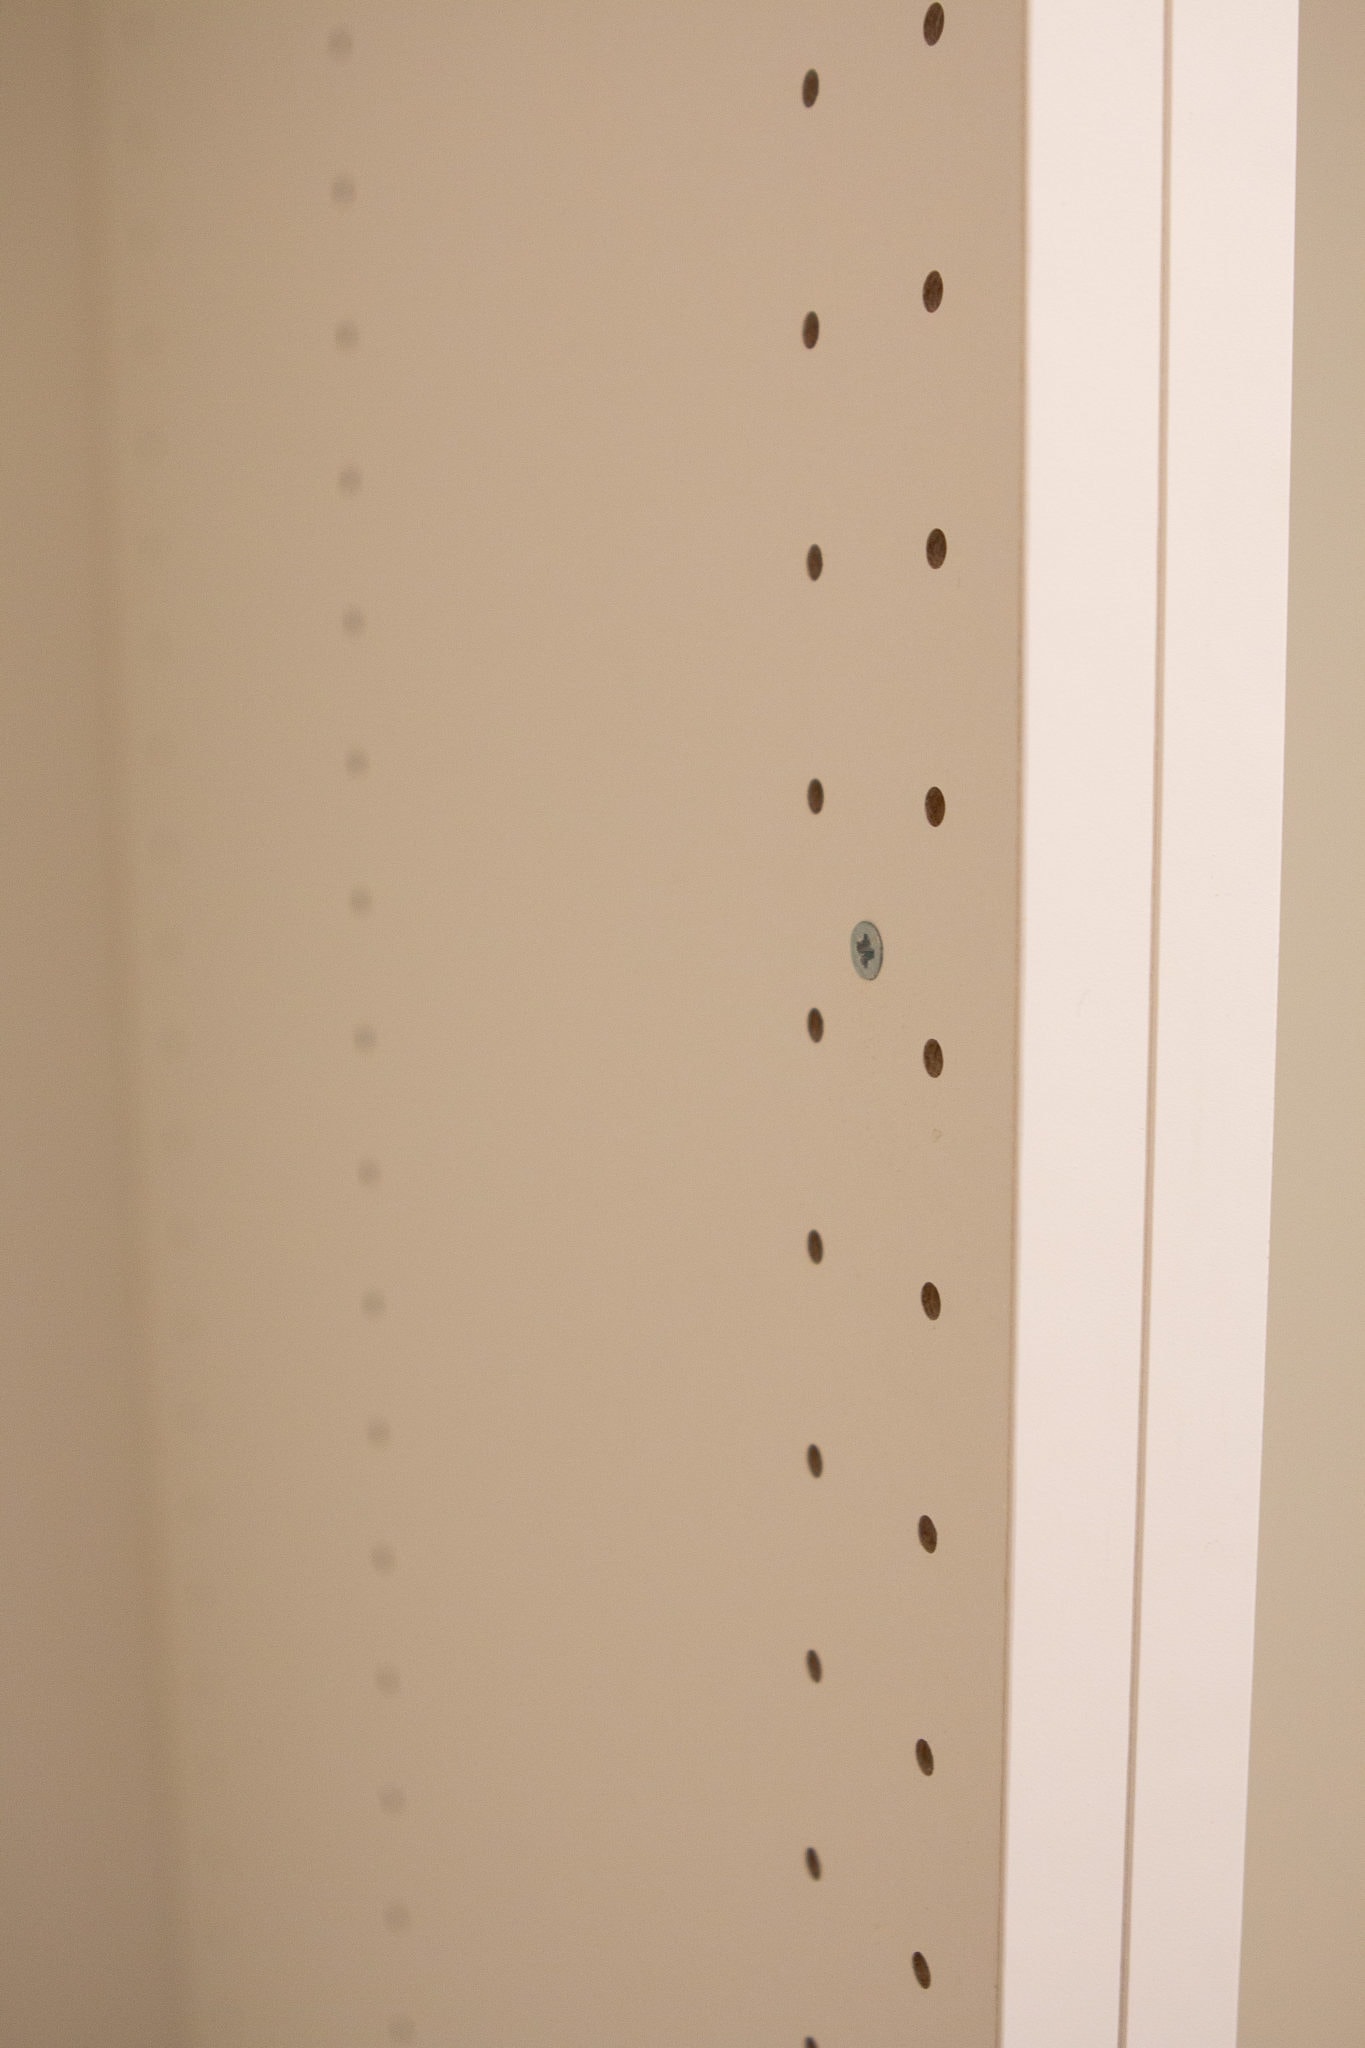 Use a screw to put cabinets together